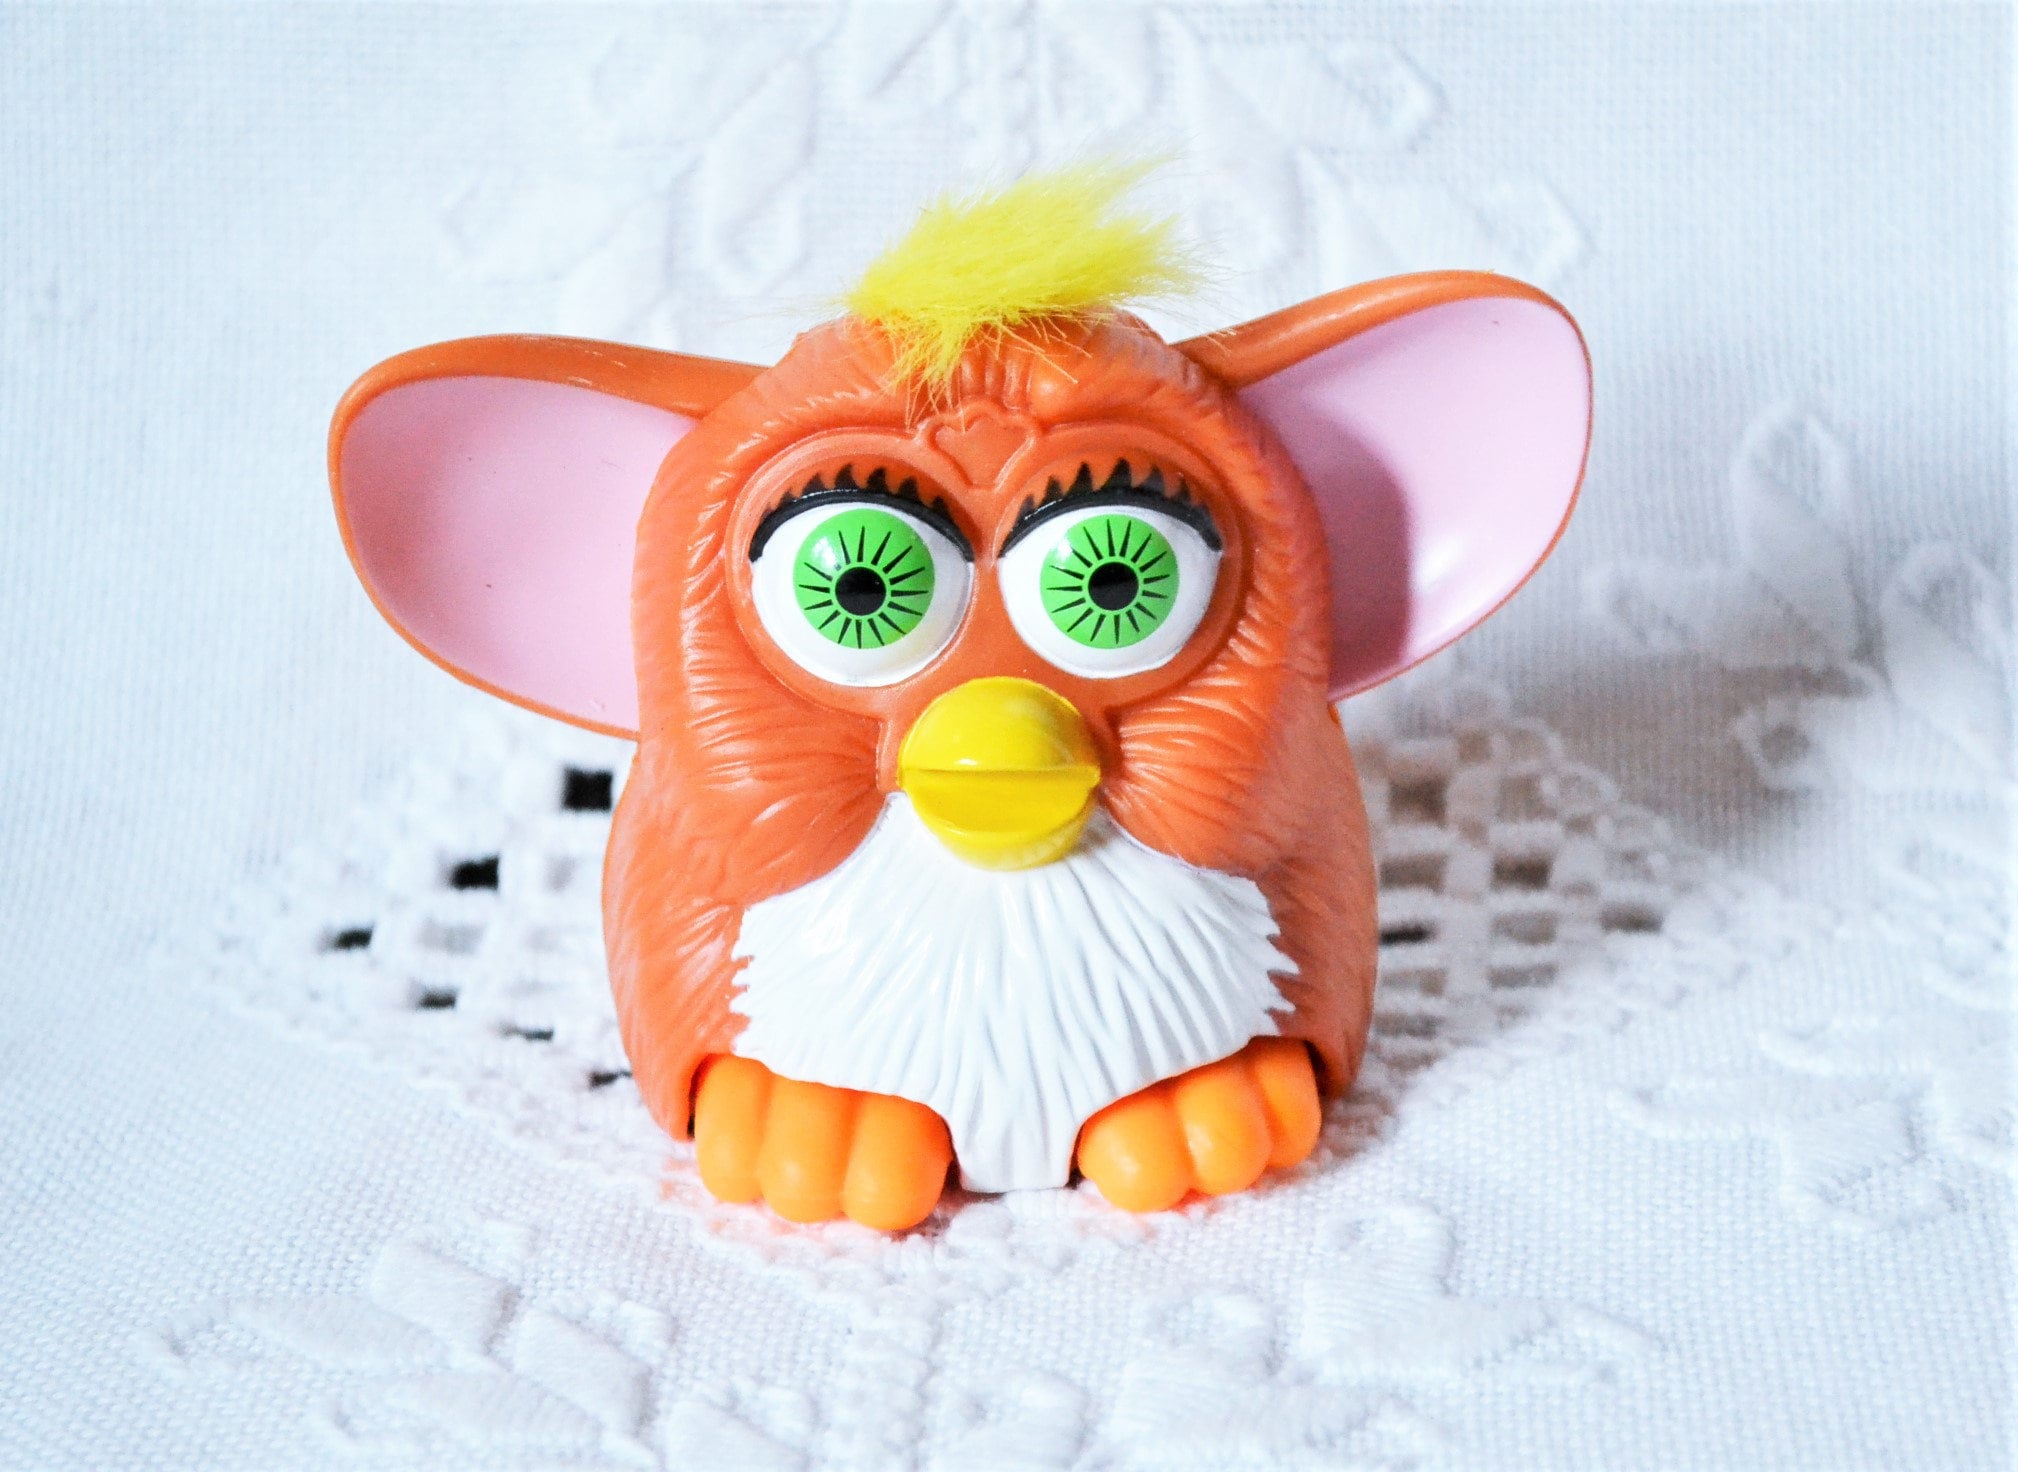 Toys: The nineties brand going for a re-furby-shment